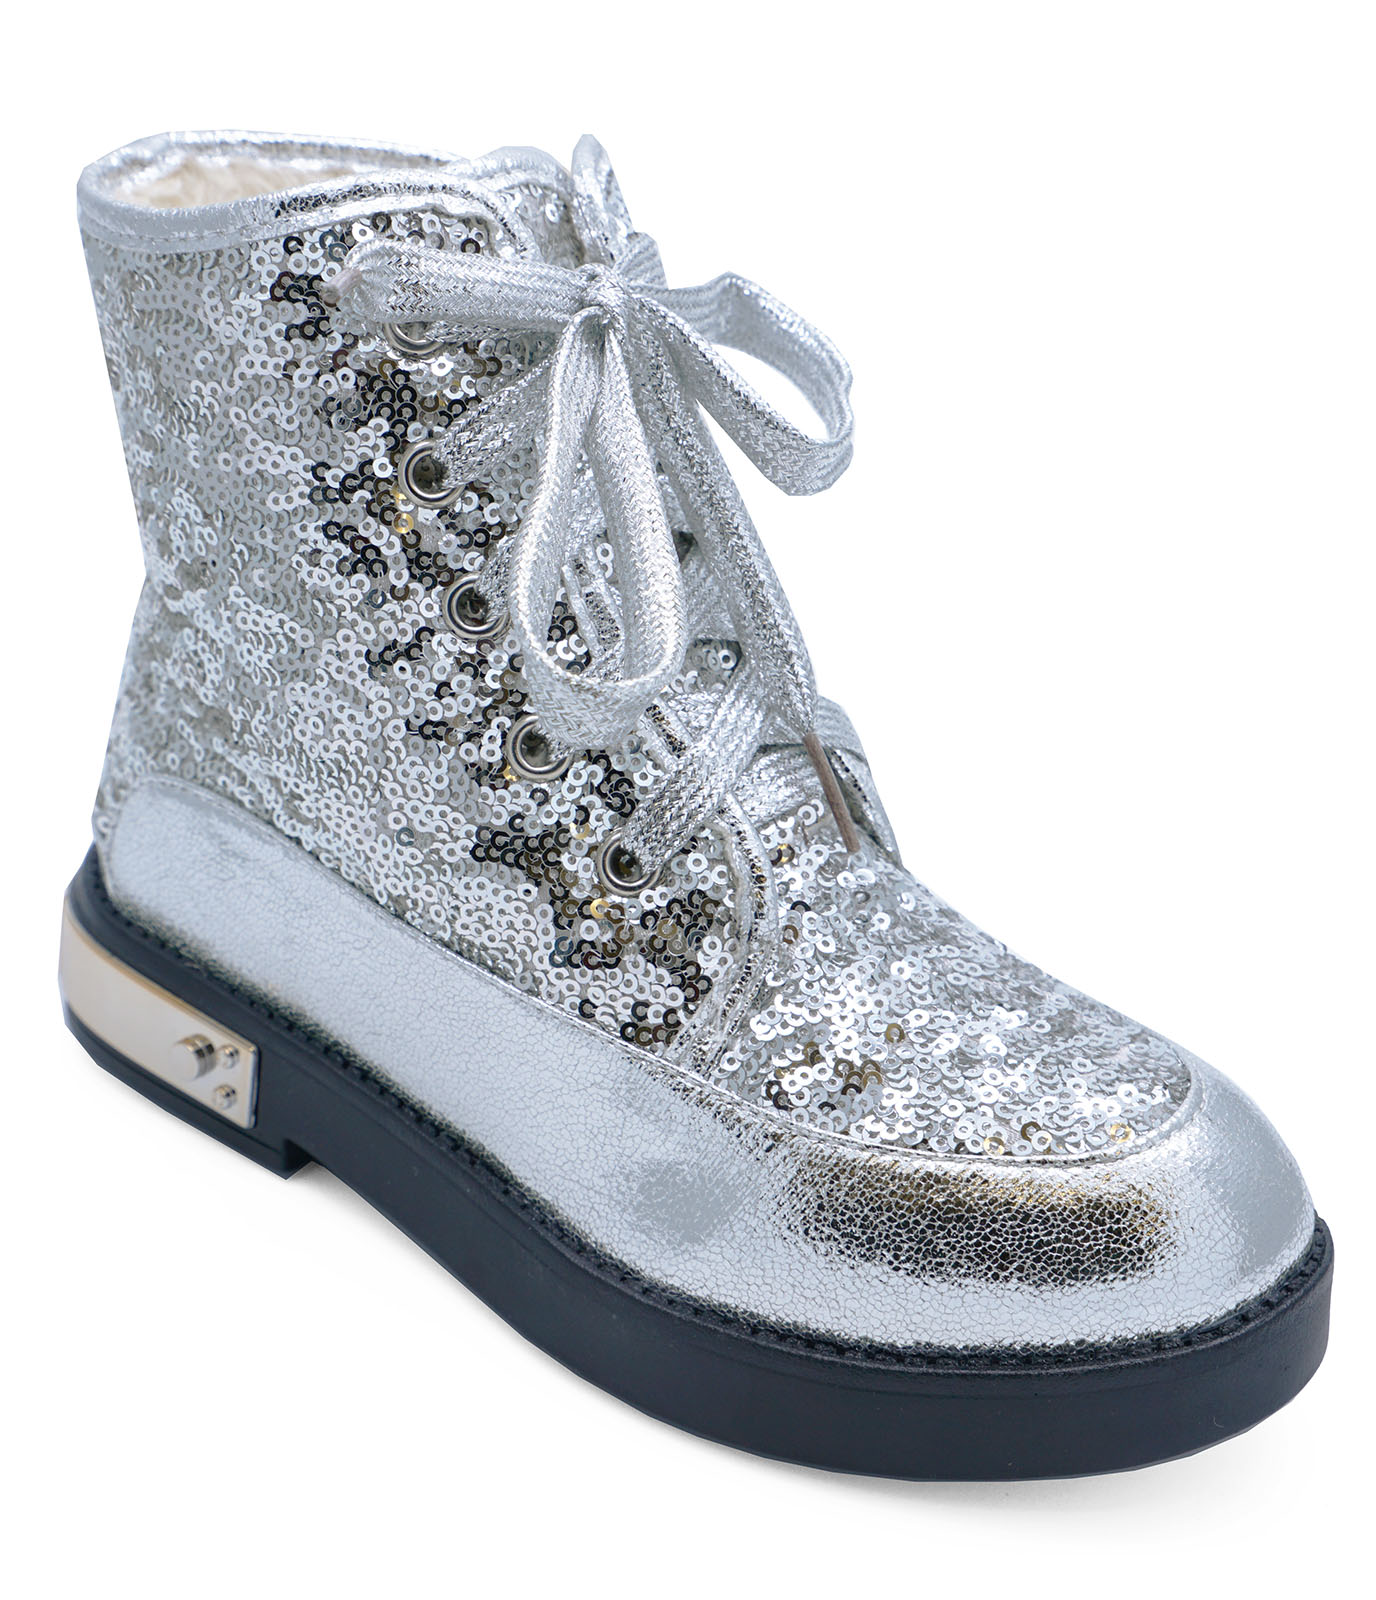 GIRLS KIDS CHILDRENS SILVER SEQUIN LACE-UP BOVVER RETRO ANKLE BOOTS ...